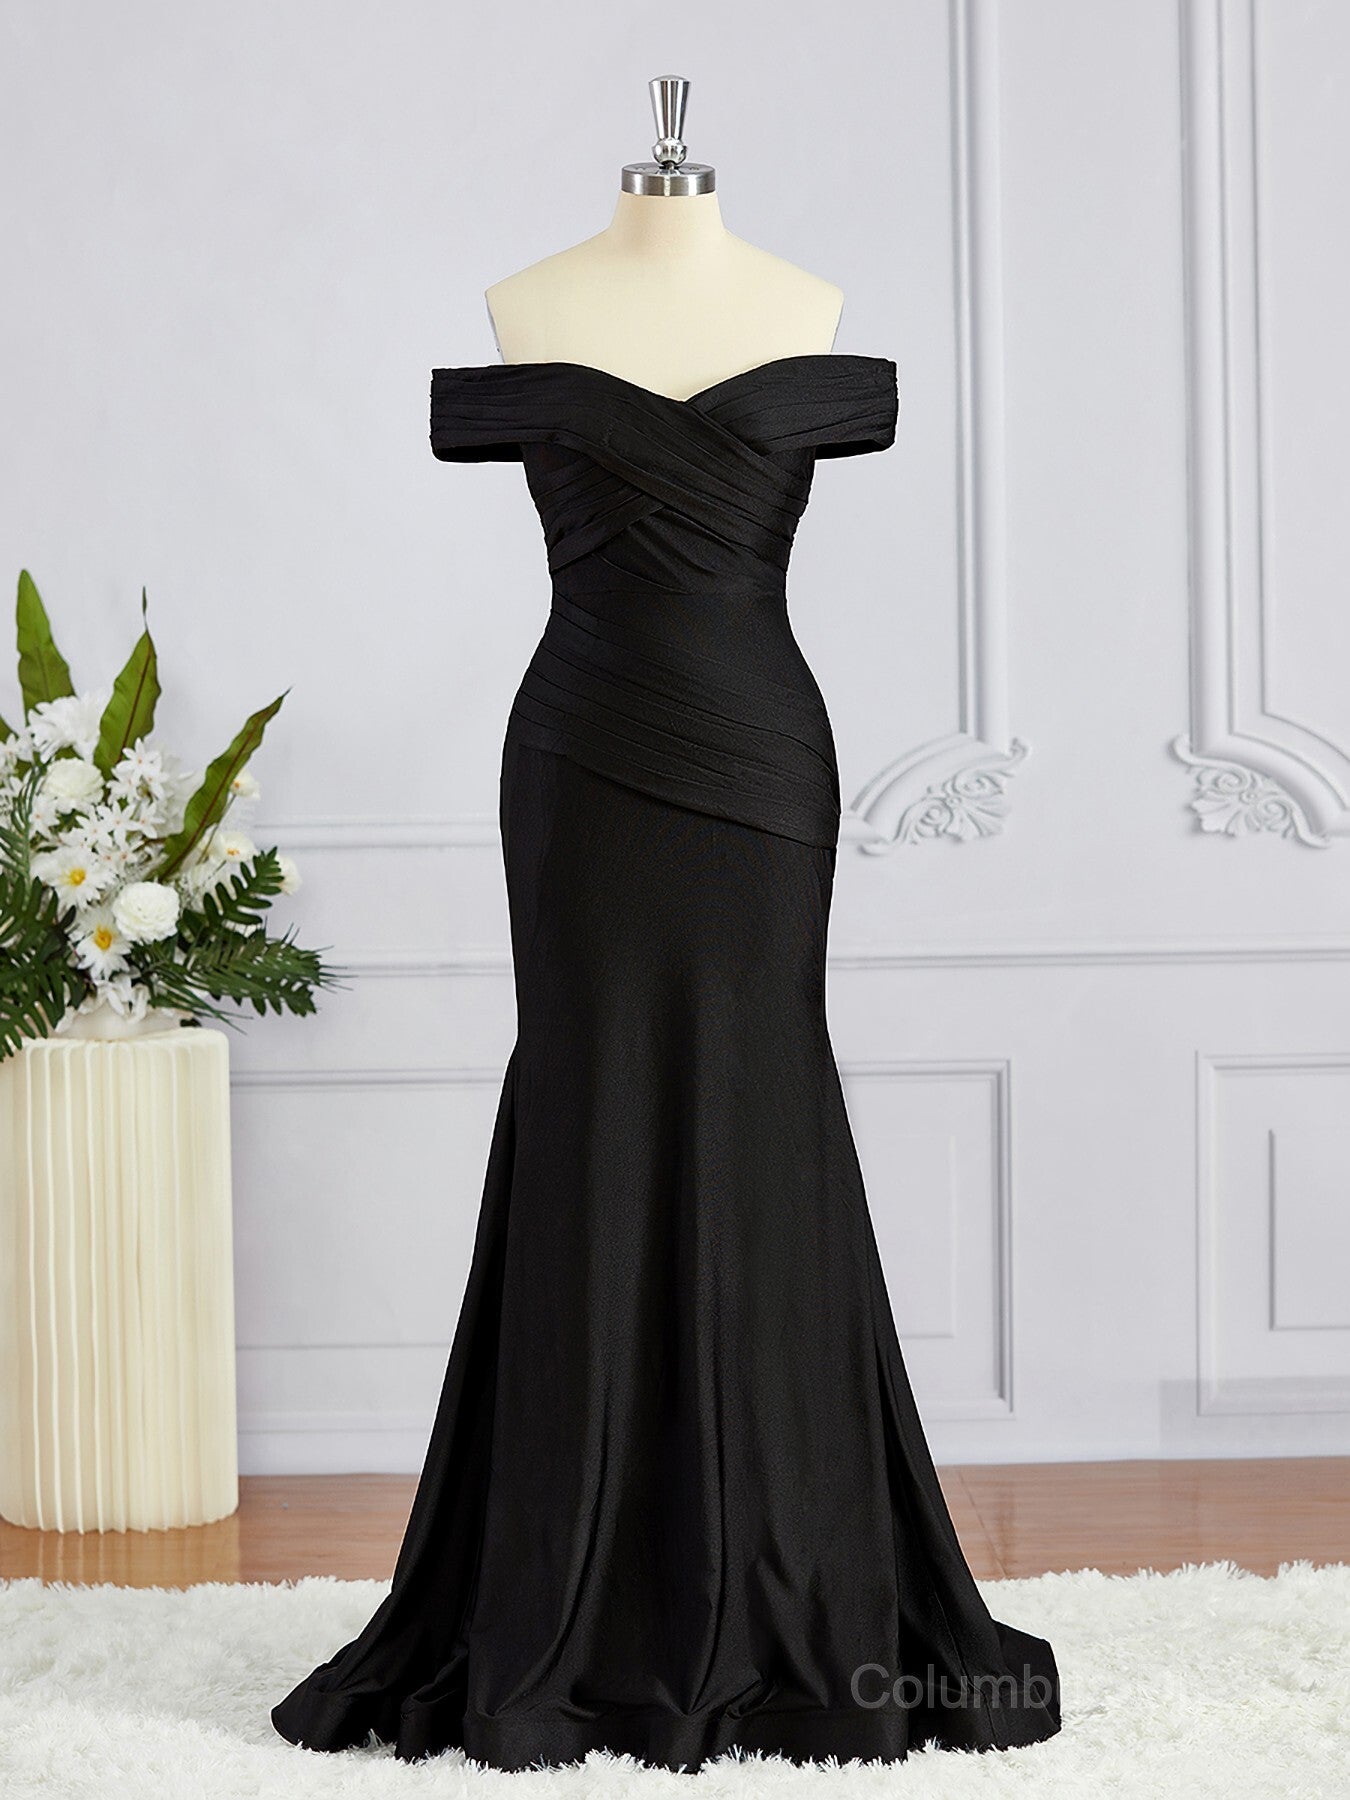 Sheath/Column Off-the-Shoulder Sweep Train Jersey Corset Bridesmaid Dresses outfit, Prom Dresses Website